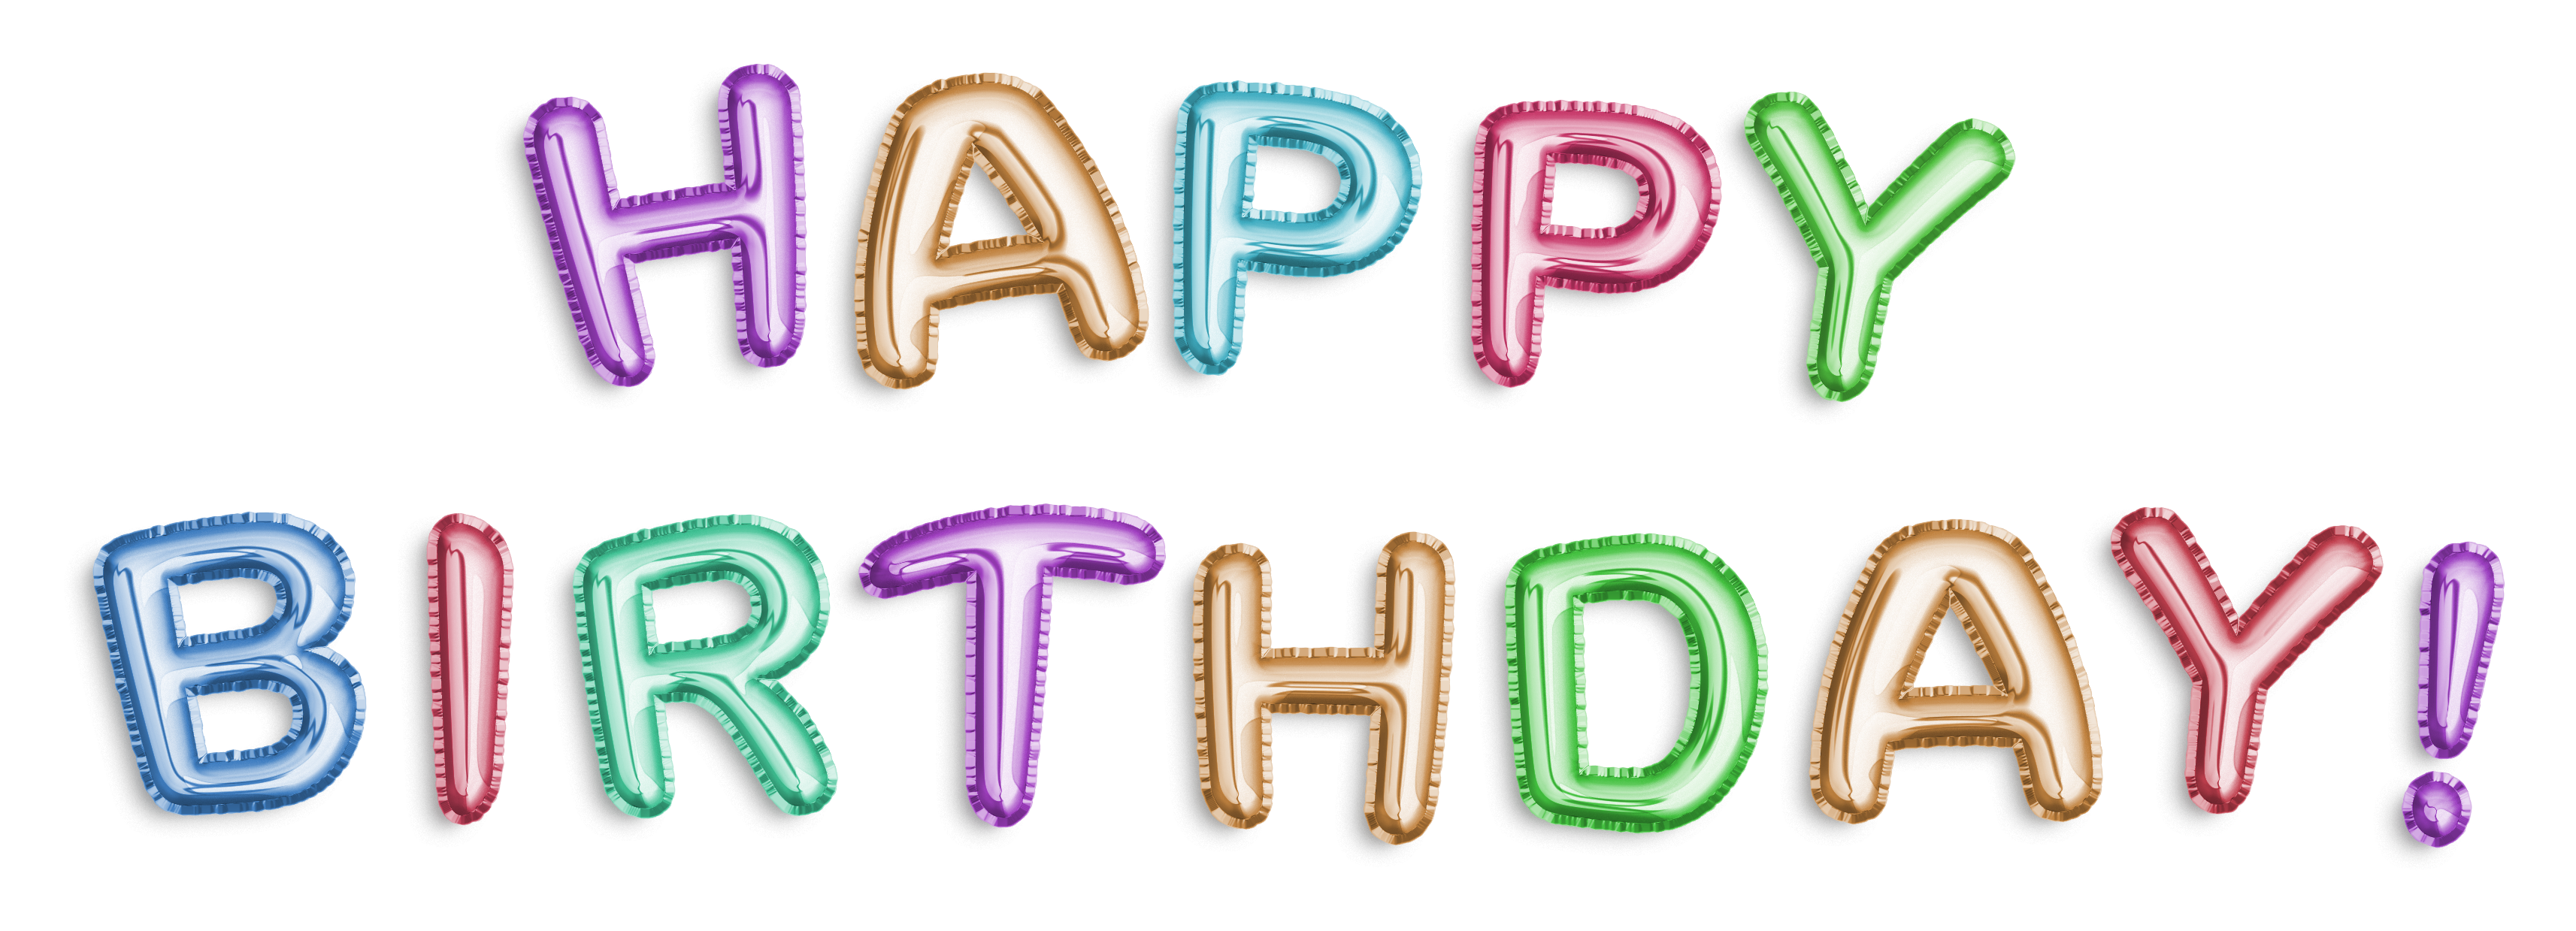 Happy Birthday Colorful Foil PNG Clip Art Image | Gallery Yopriceville ...